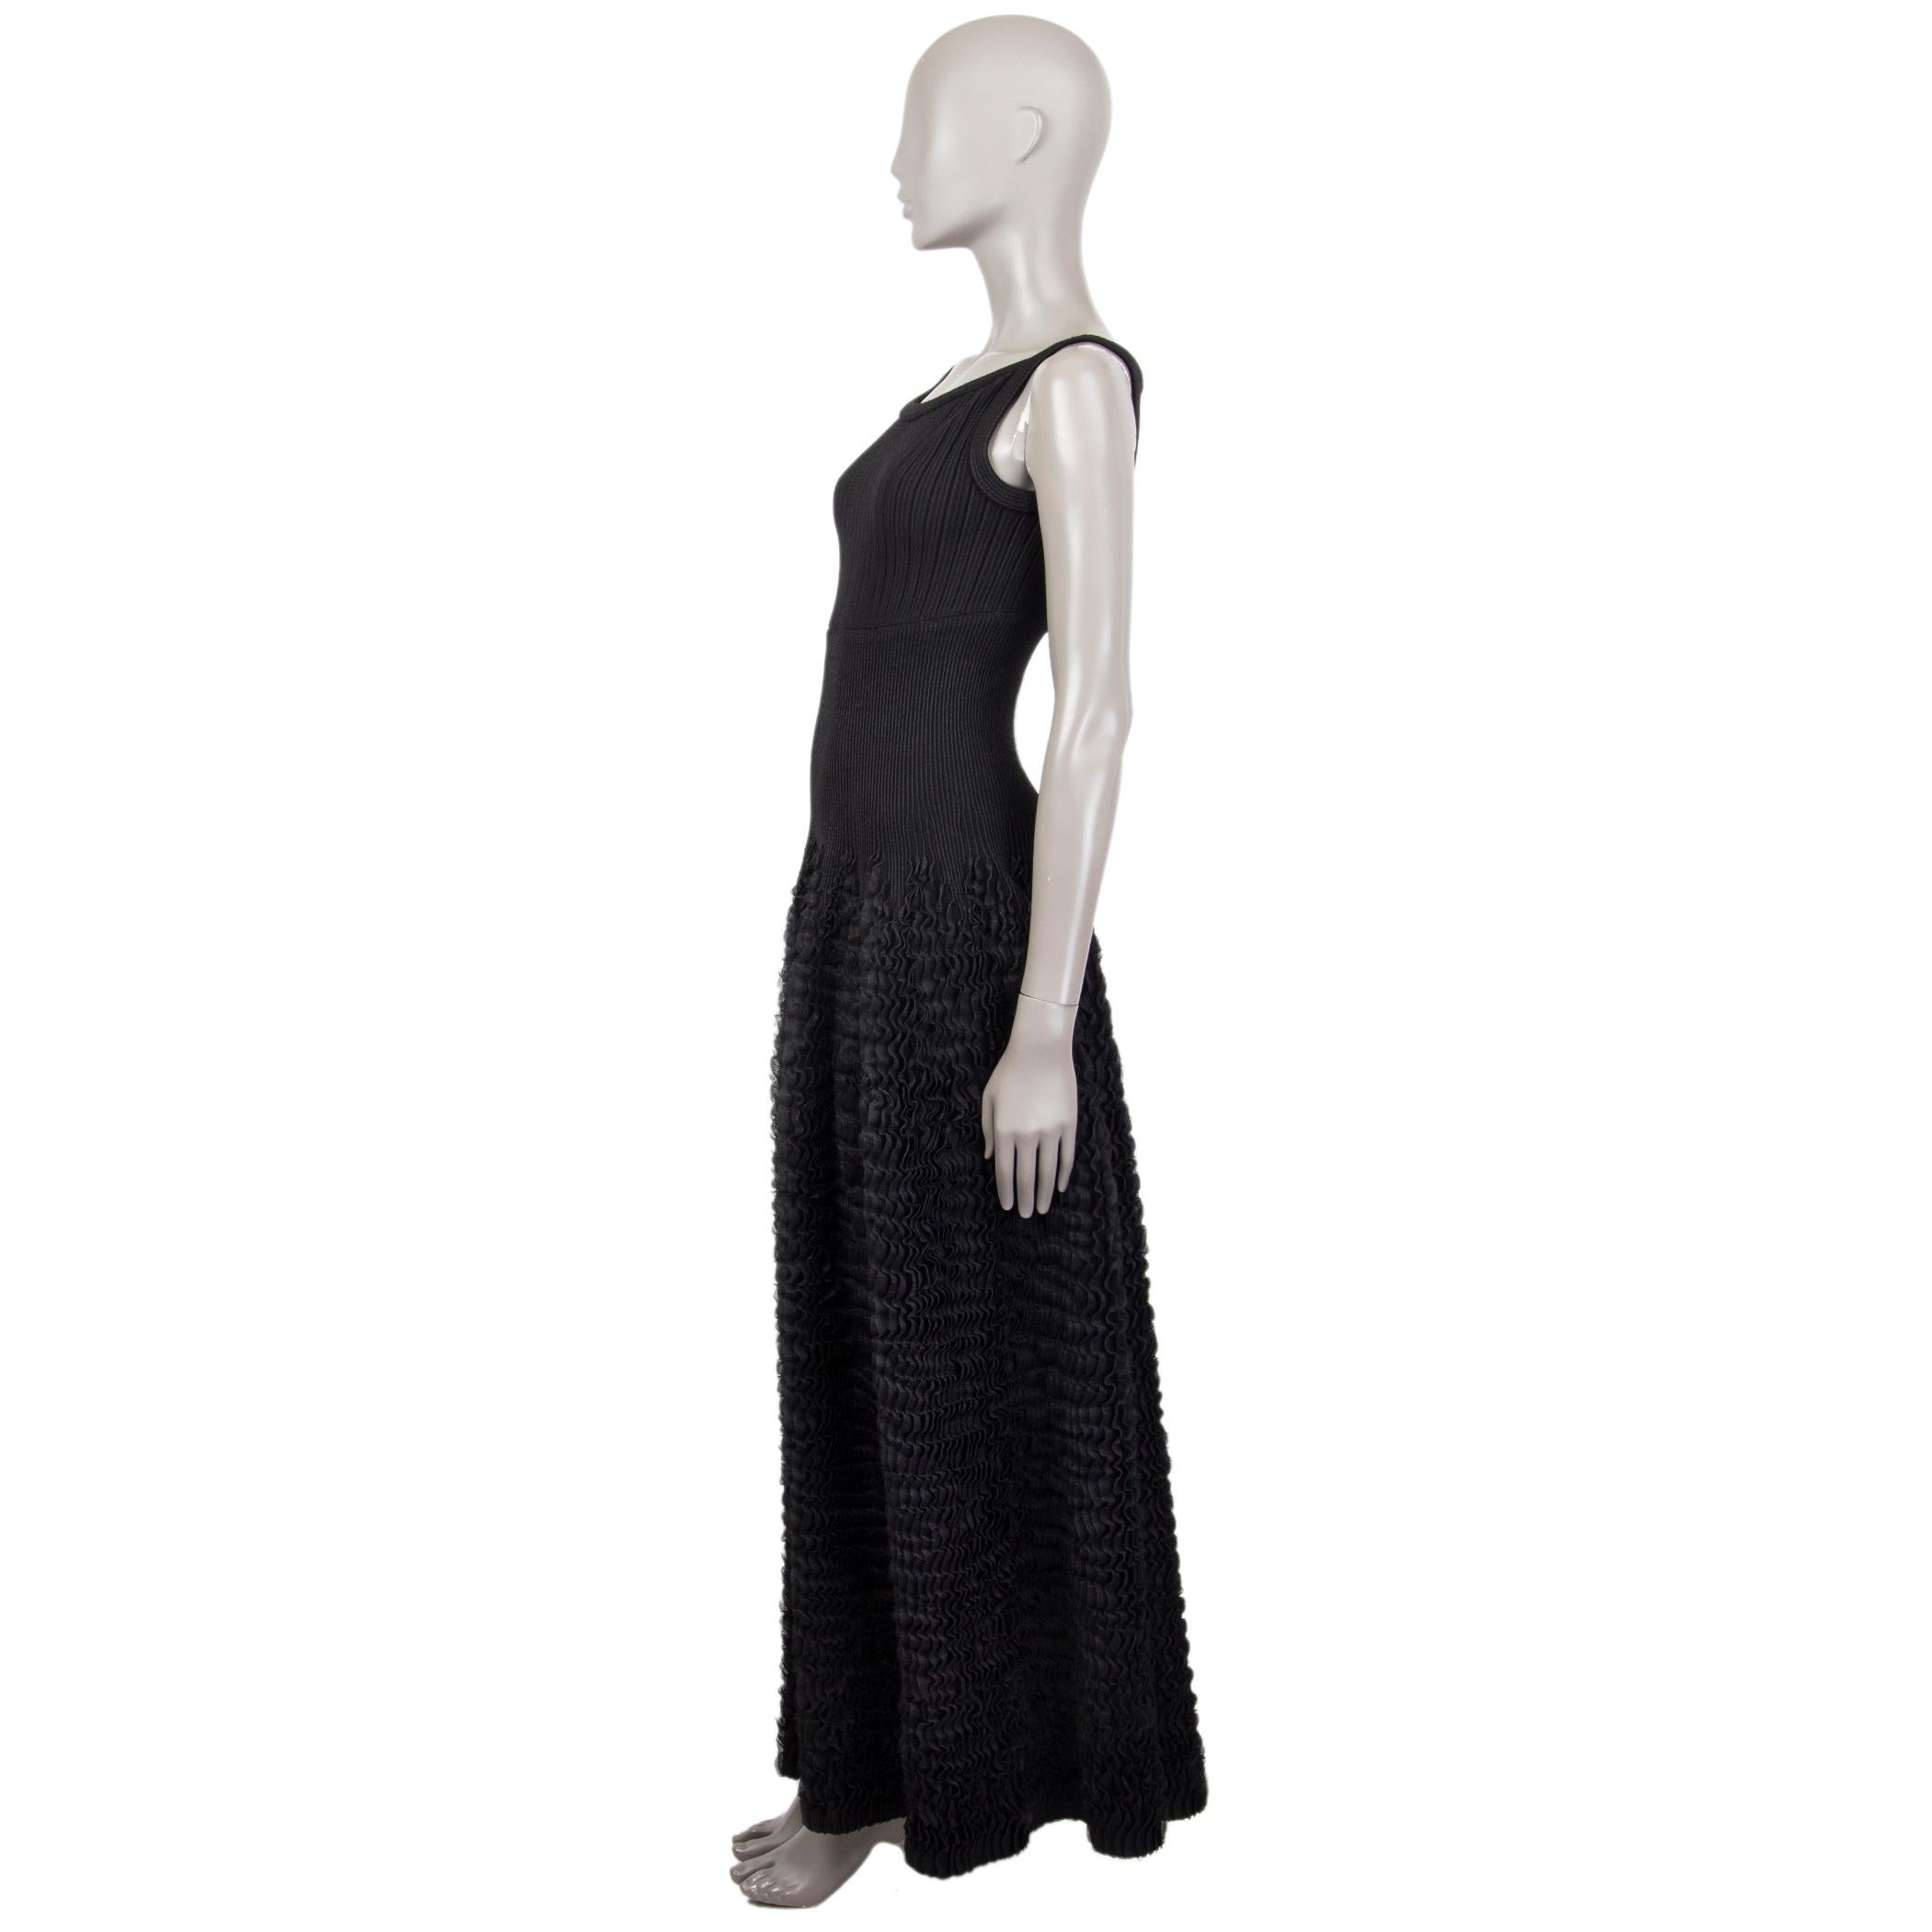 Alaïa sleeveless silhouette ruffle-dress in black wool (66%), polyester (20%), polyamide (12%) and elastane (2%) with a round neck. Closes on the back with a concealed zipper. Unlined. Has been worn and is in excellent condition. 

Tag Size 36
Size